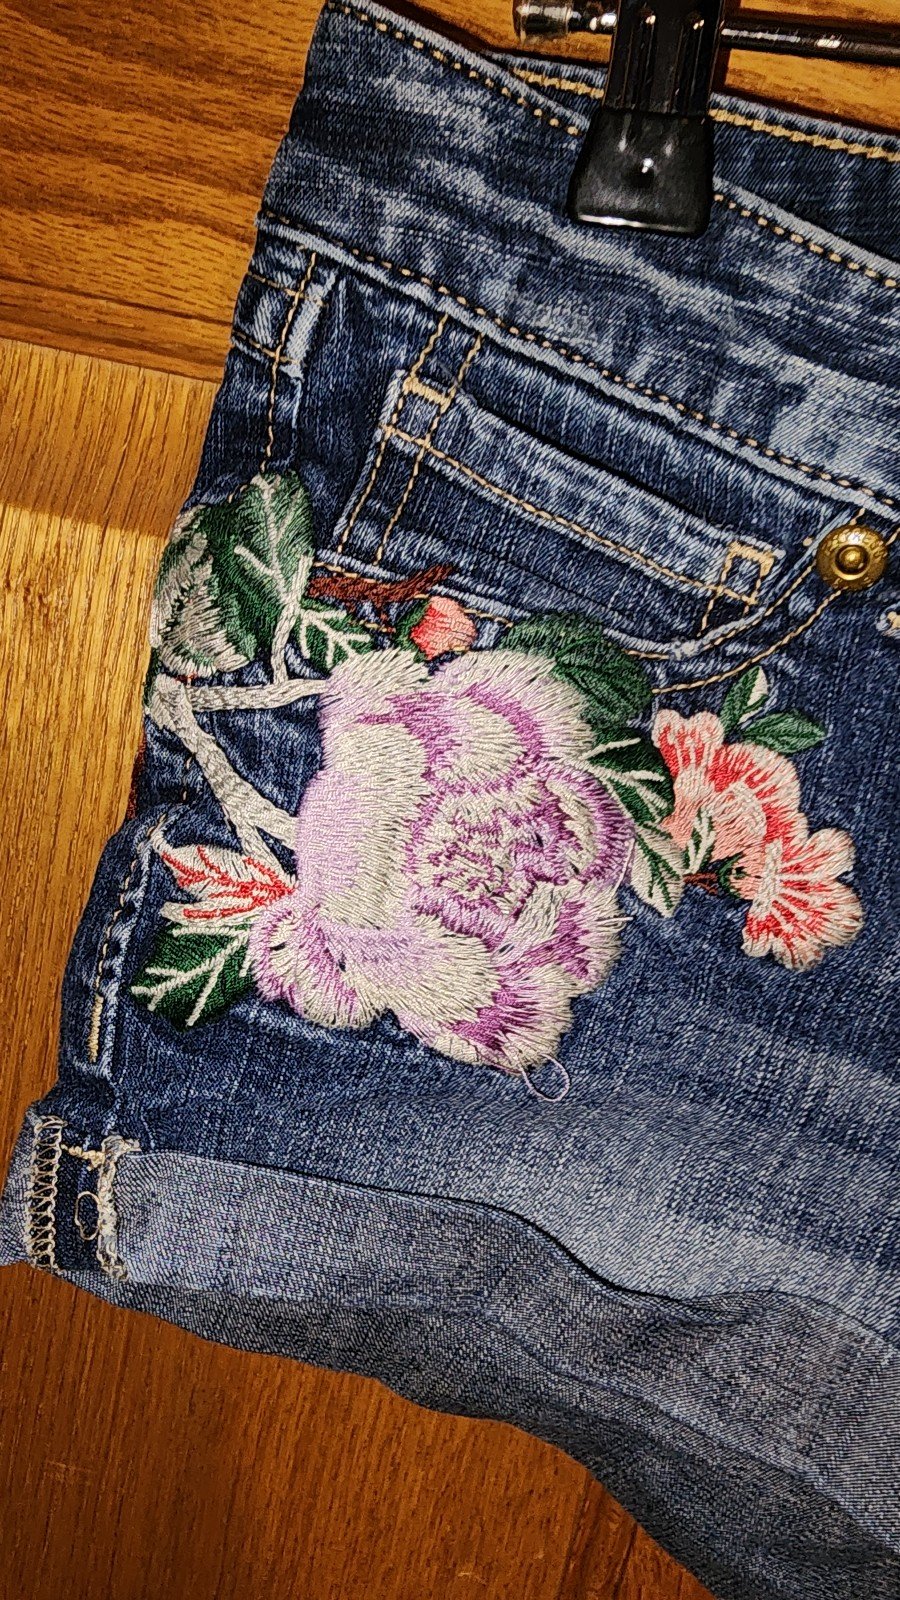 Cheap Express Floral Embroidered Stitched Denim Short Shorts Hippie Front Pockets Sewn pmL0ZZ0Hb Cool